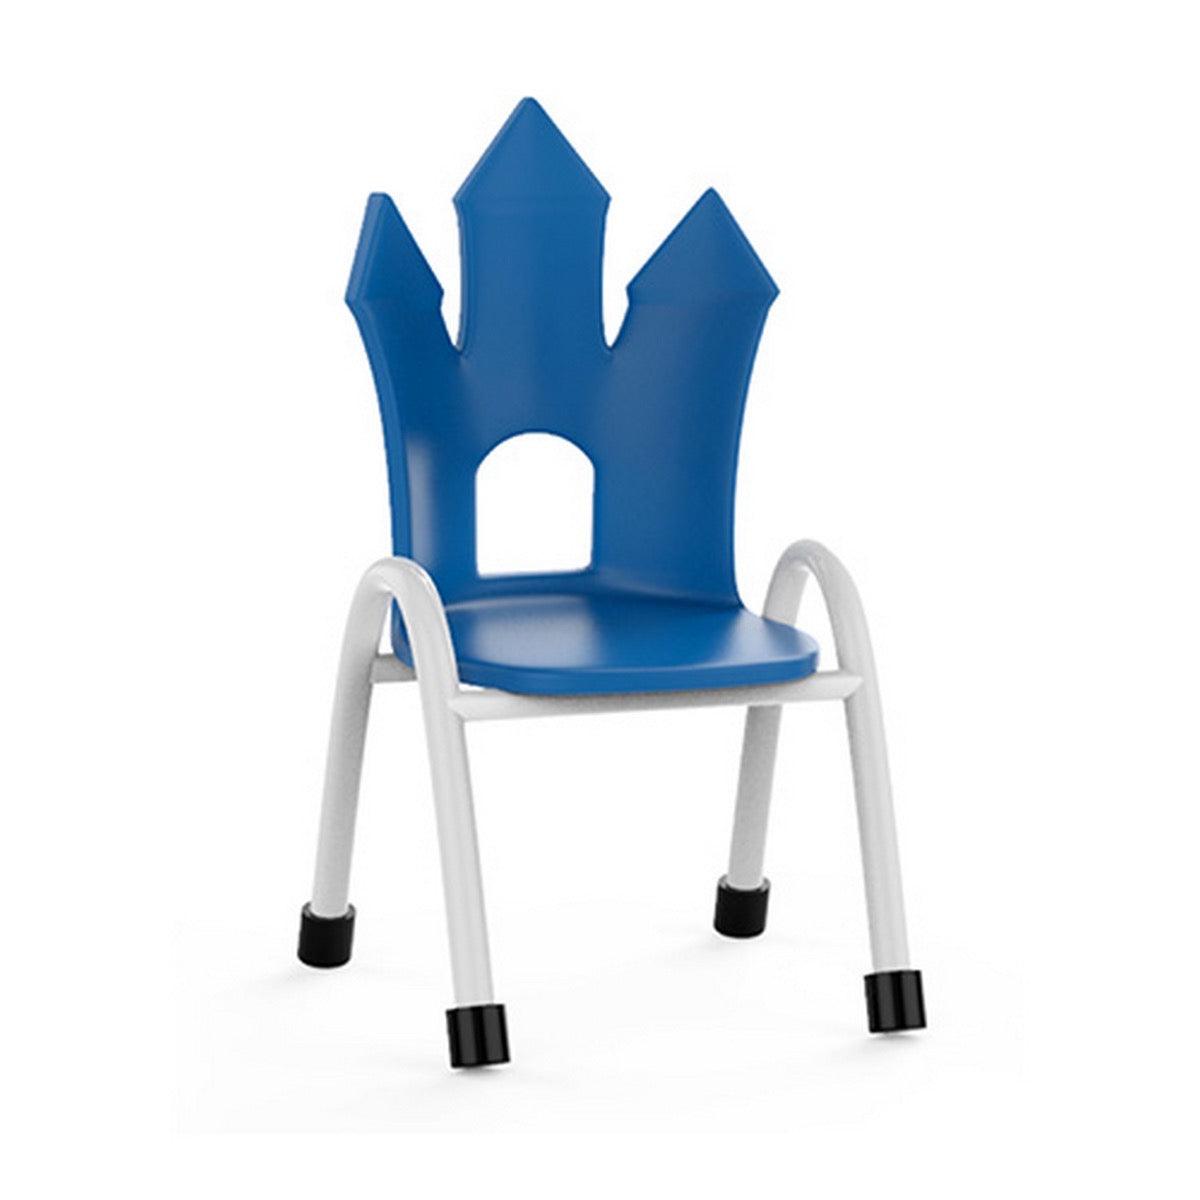 Ok Play Castle Chair, Study Chair, Sturdy And Durable Chair, Plastic Chair, Perfect For Home, Creches And School, Blue, 5 to 10 Years, Height 12 Inches